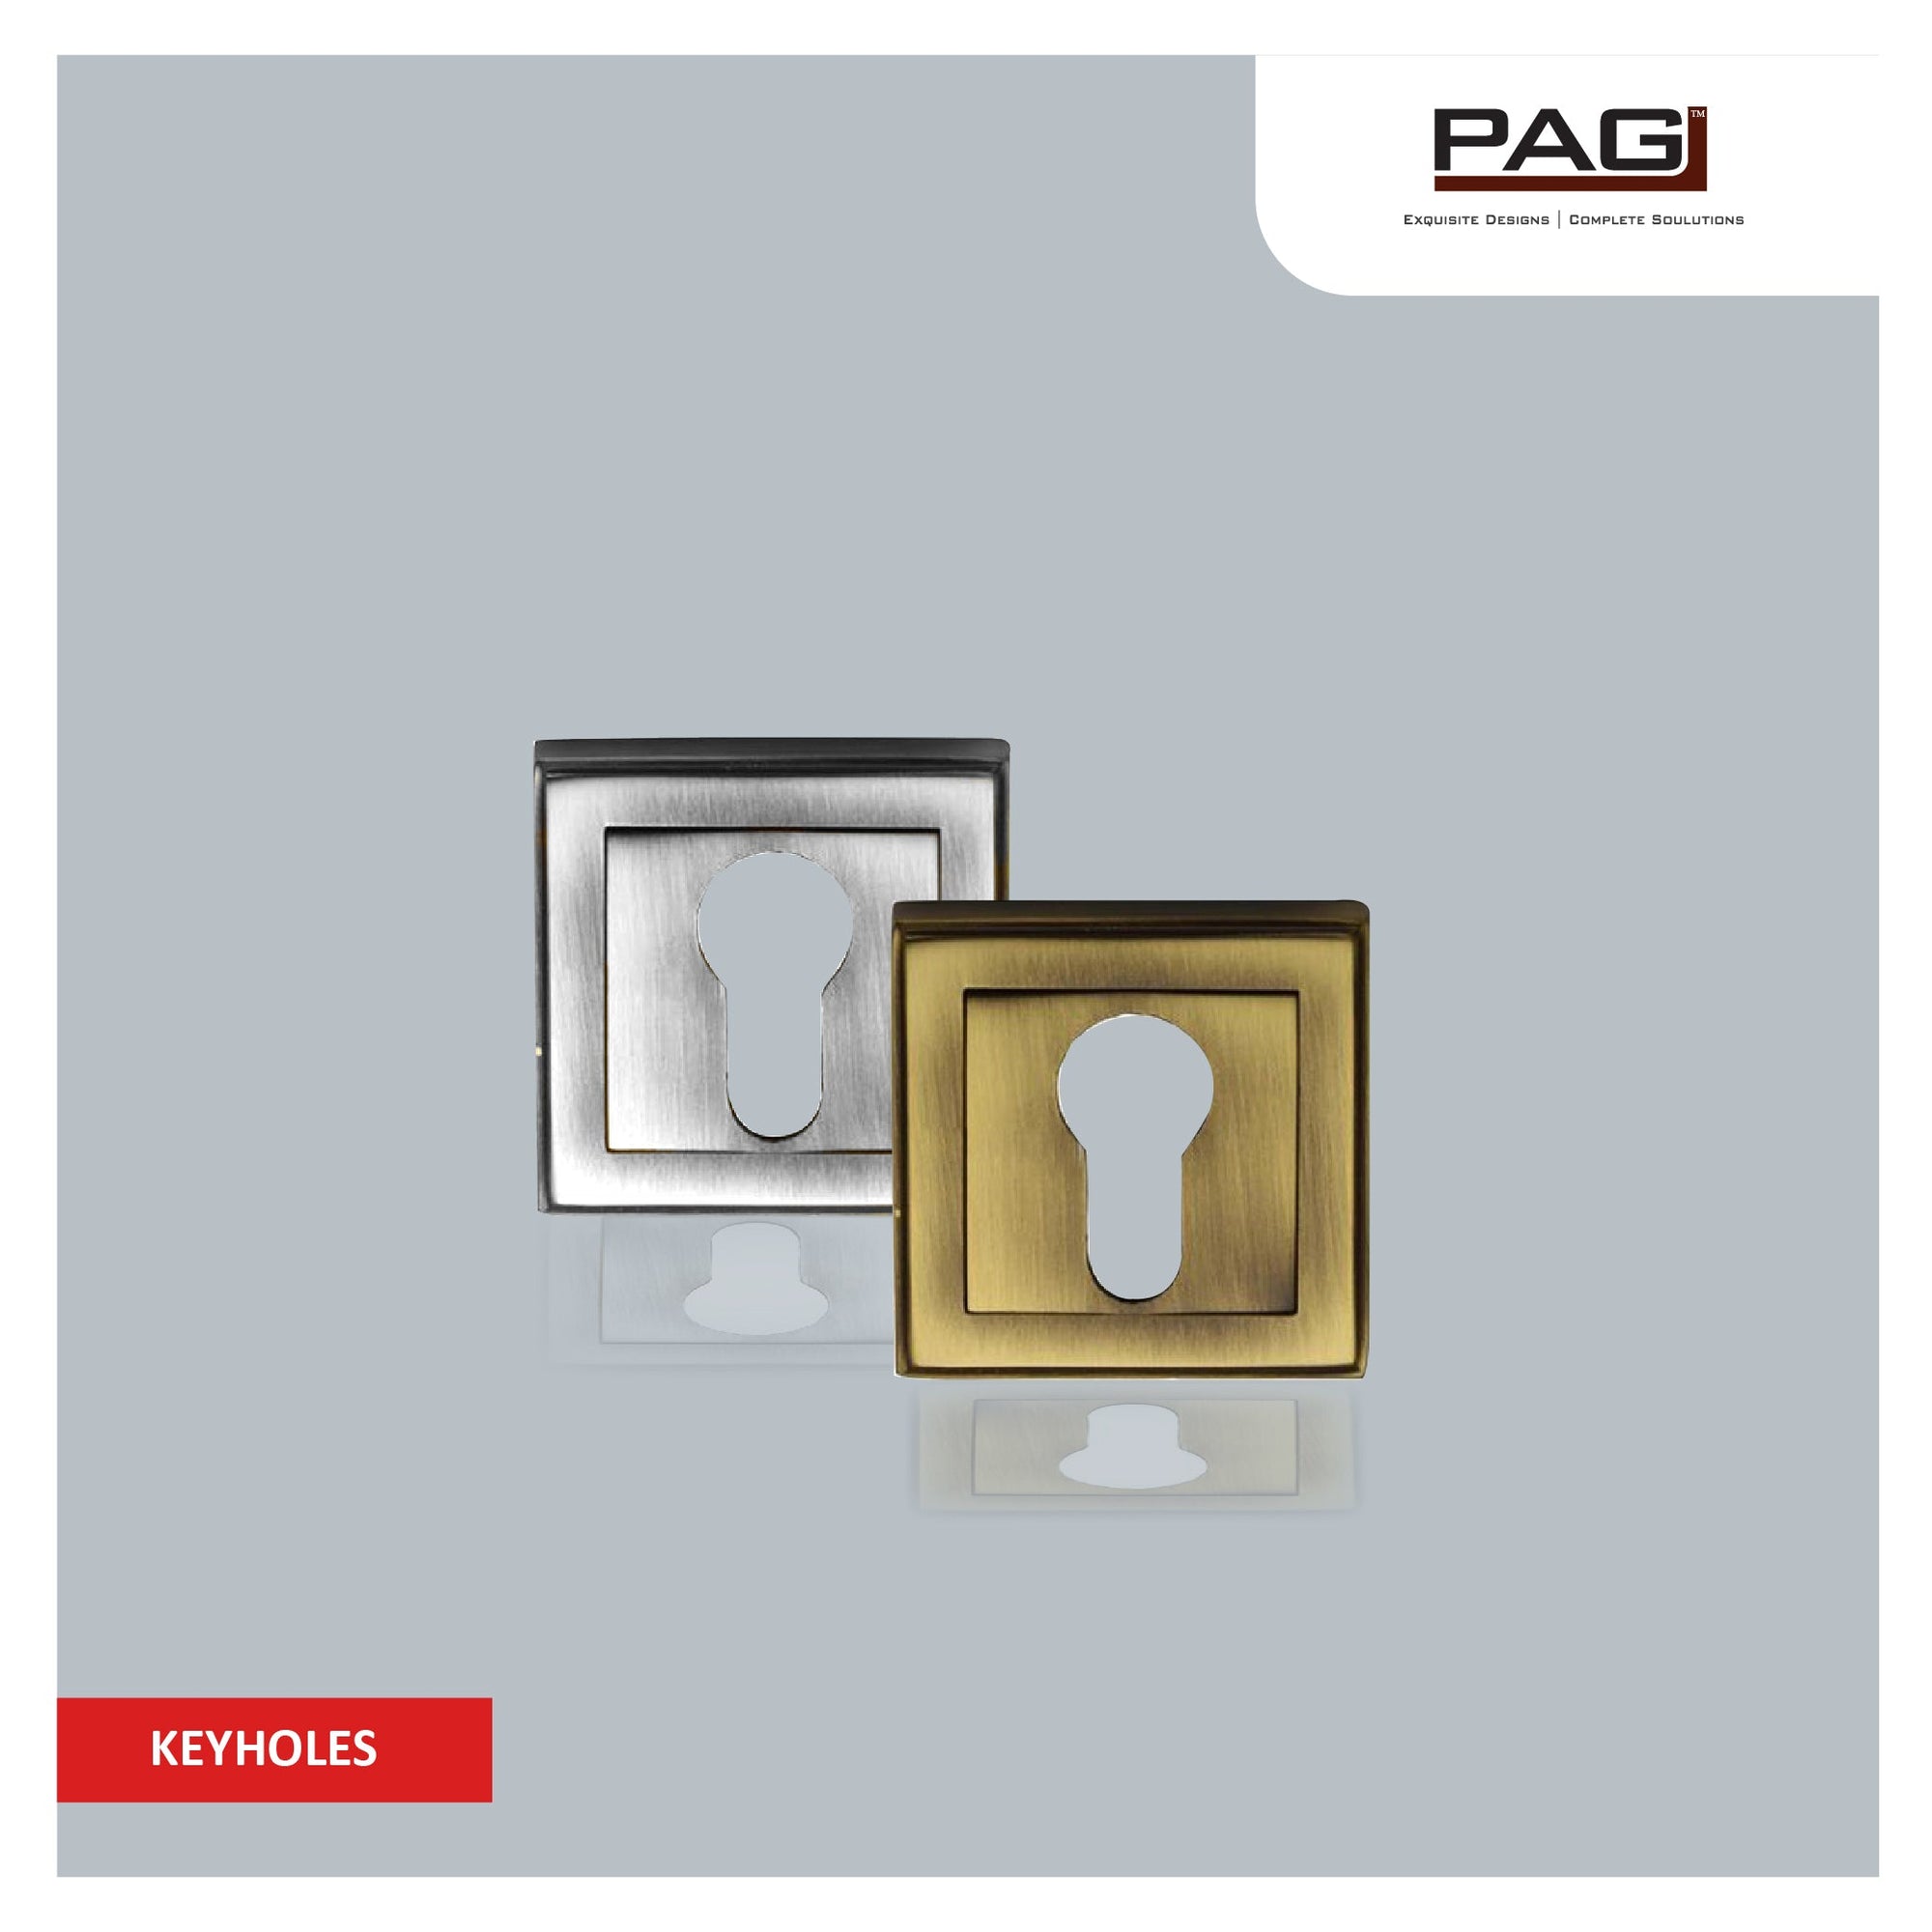 PAG Keyholes - Stylish and functional keyhole options for your doors.